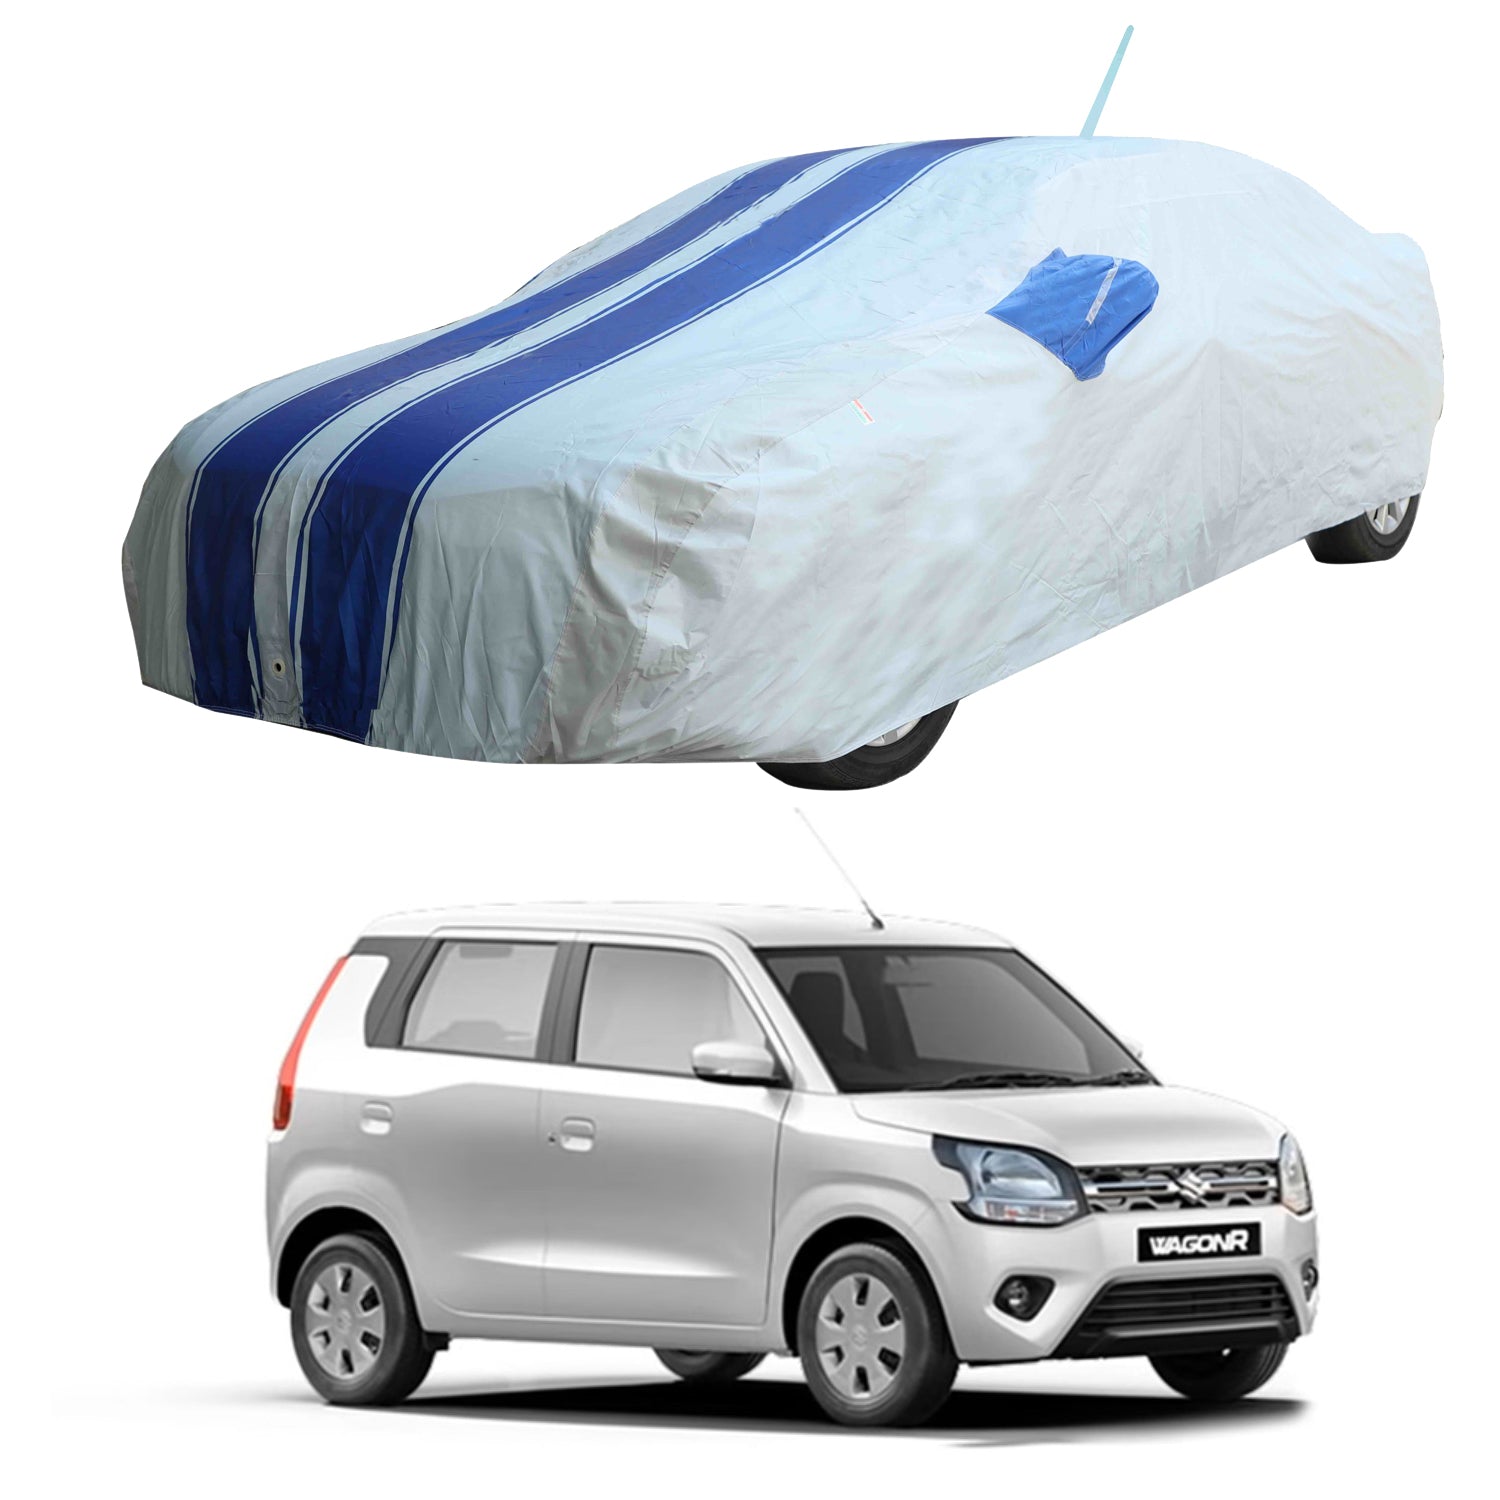 AutoTen Car Cover For Opel Vectra, Universal For Car (With Mirror Pockets)  Price in India - Buy AutoTen Car Cover For Opel Vectra, Universal For Car  (With Mirror Pockets) online at